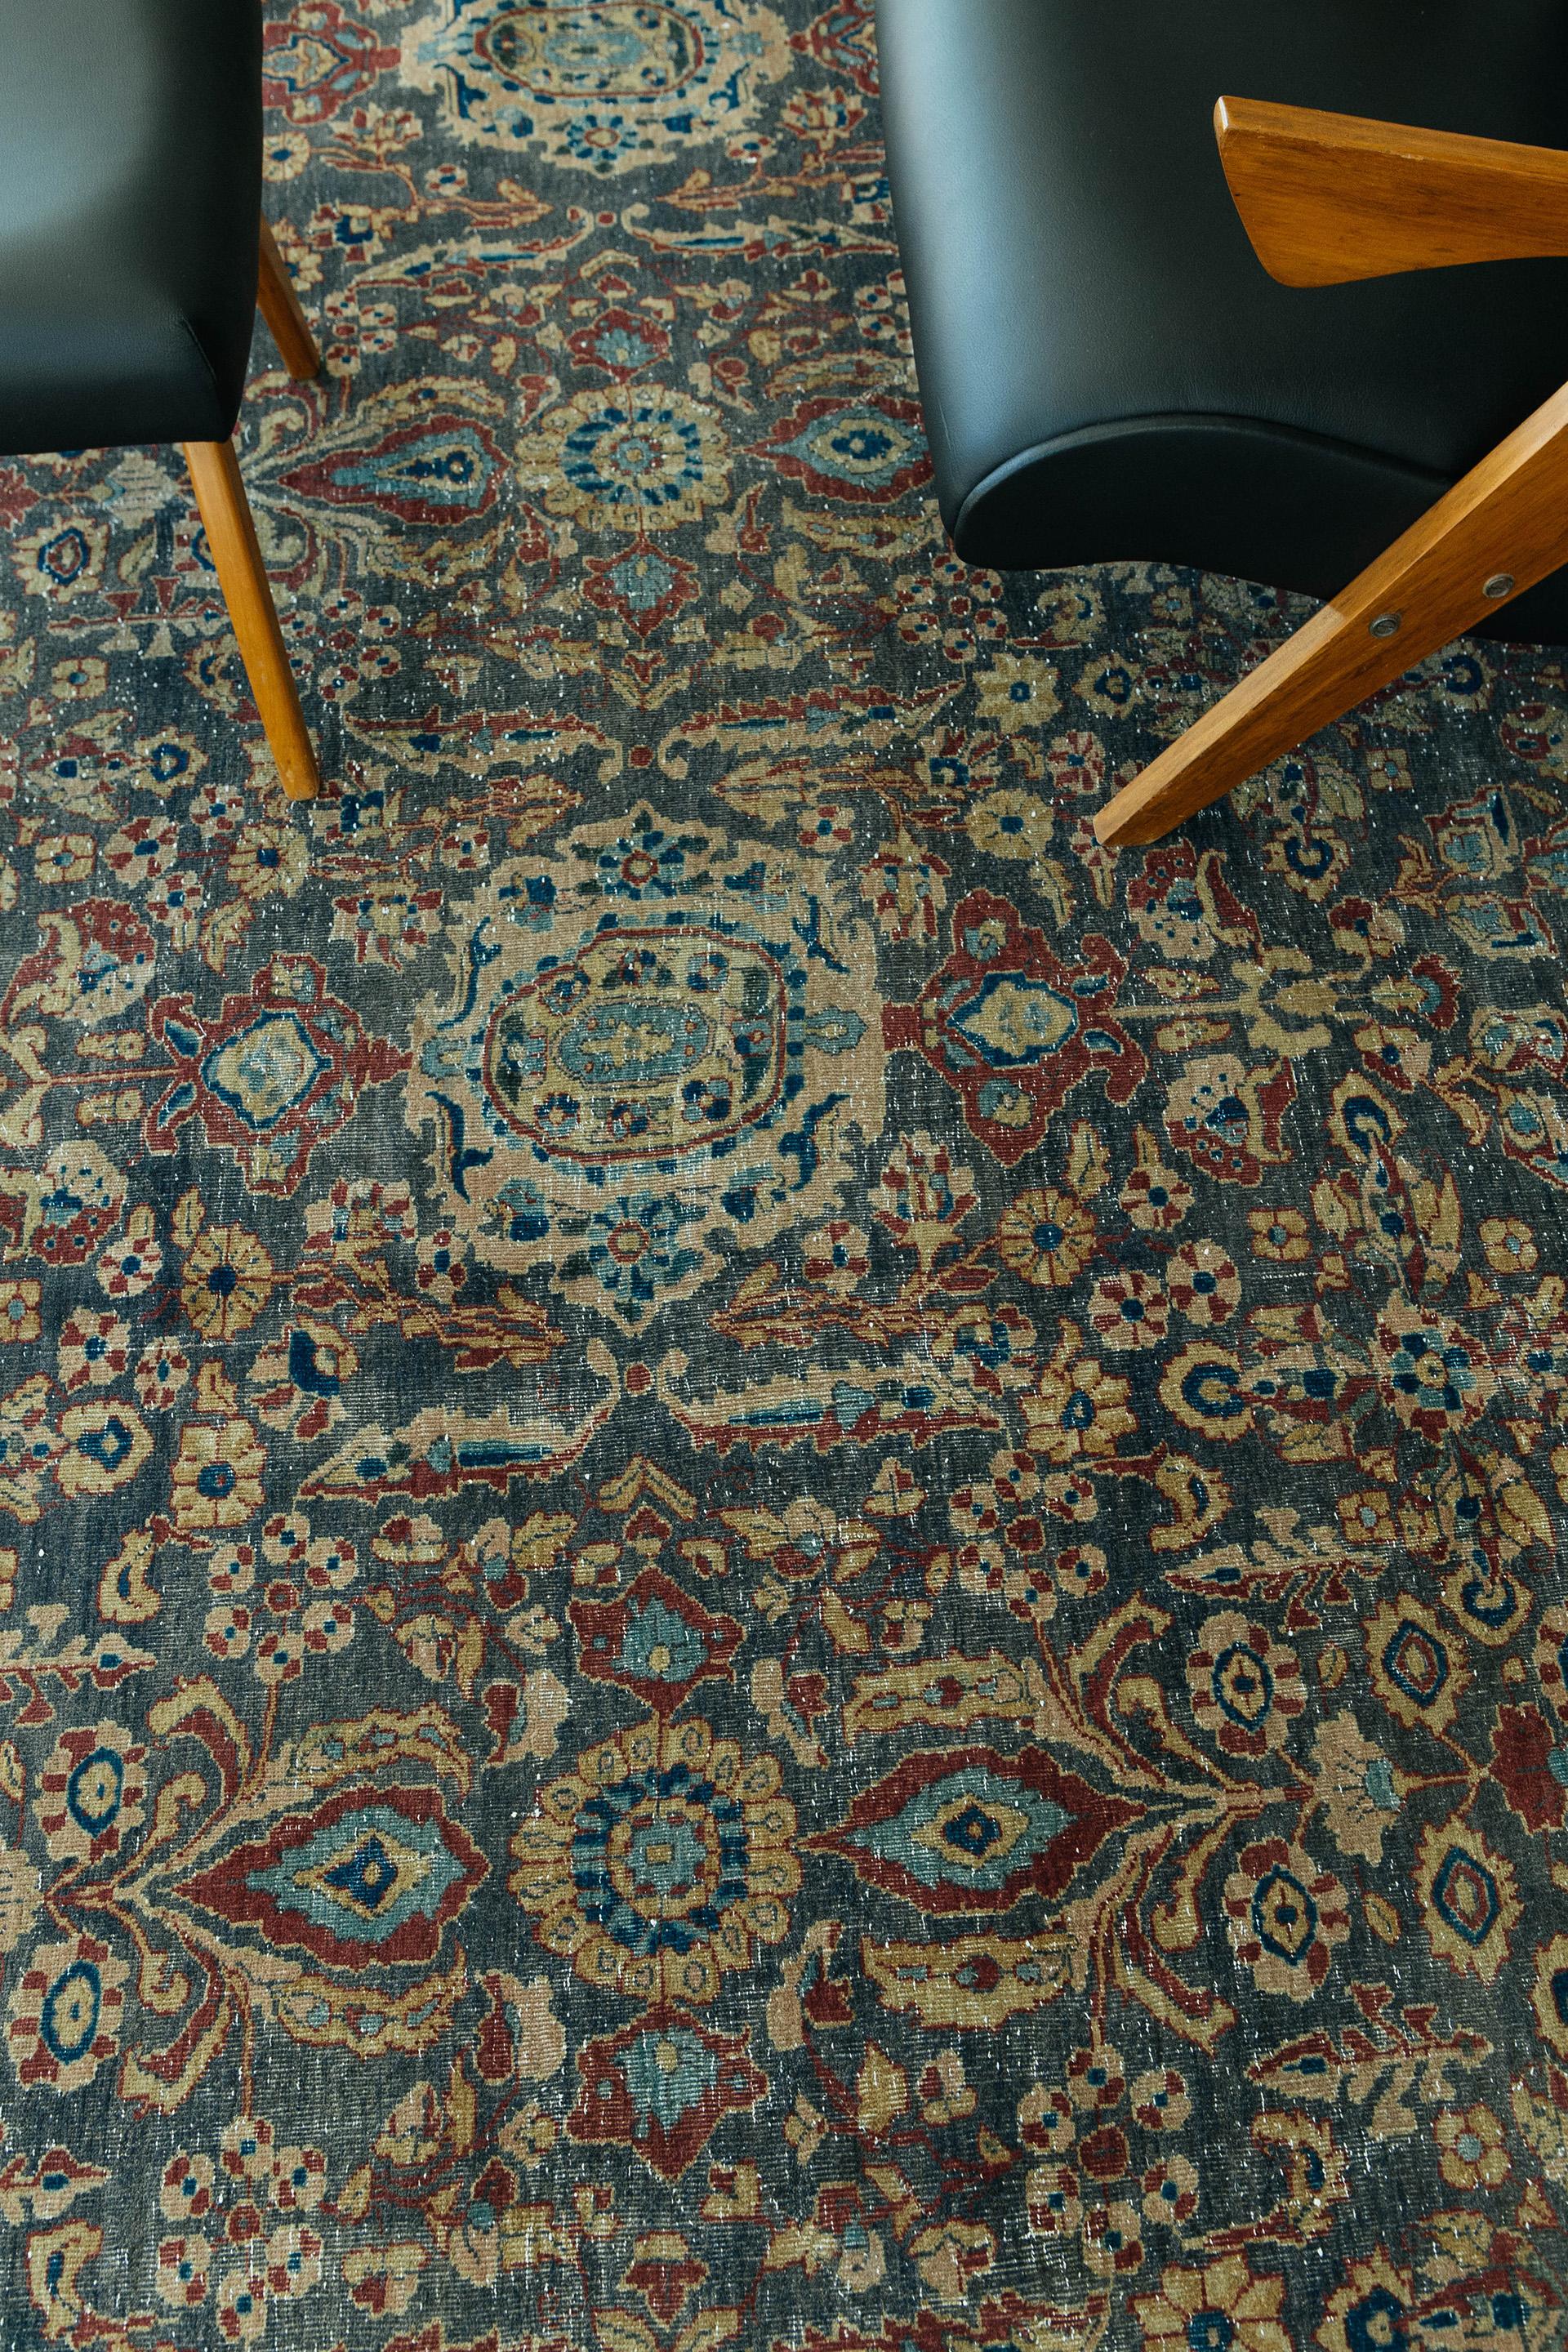 Antique Tabriz with a rich deep palette of teal and warm tan with clear blue and burgundy accents. The all-over field clambers with palmettes, medallions, rosettes, serrated leaves and is completed in matching borders of softer color contrasts. The